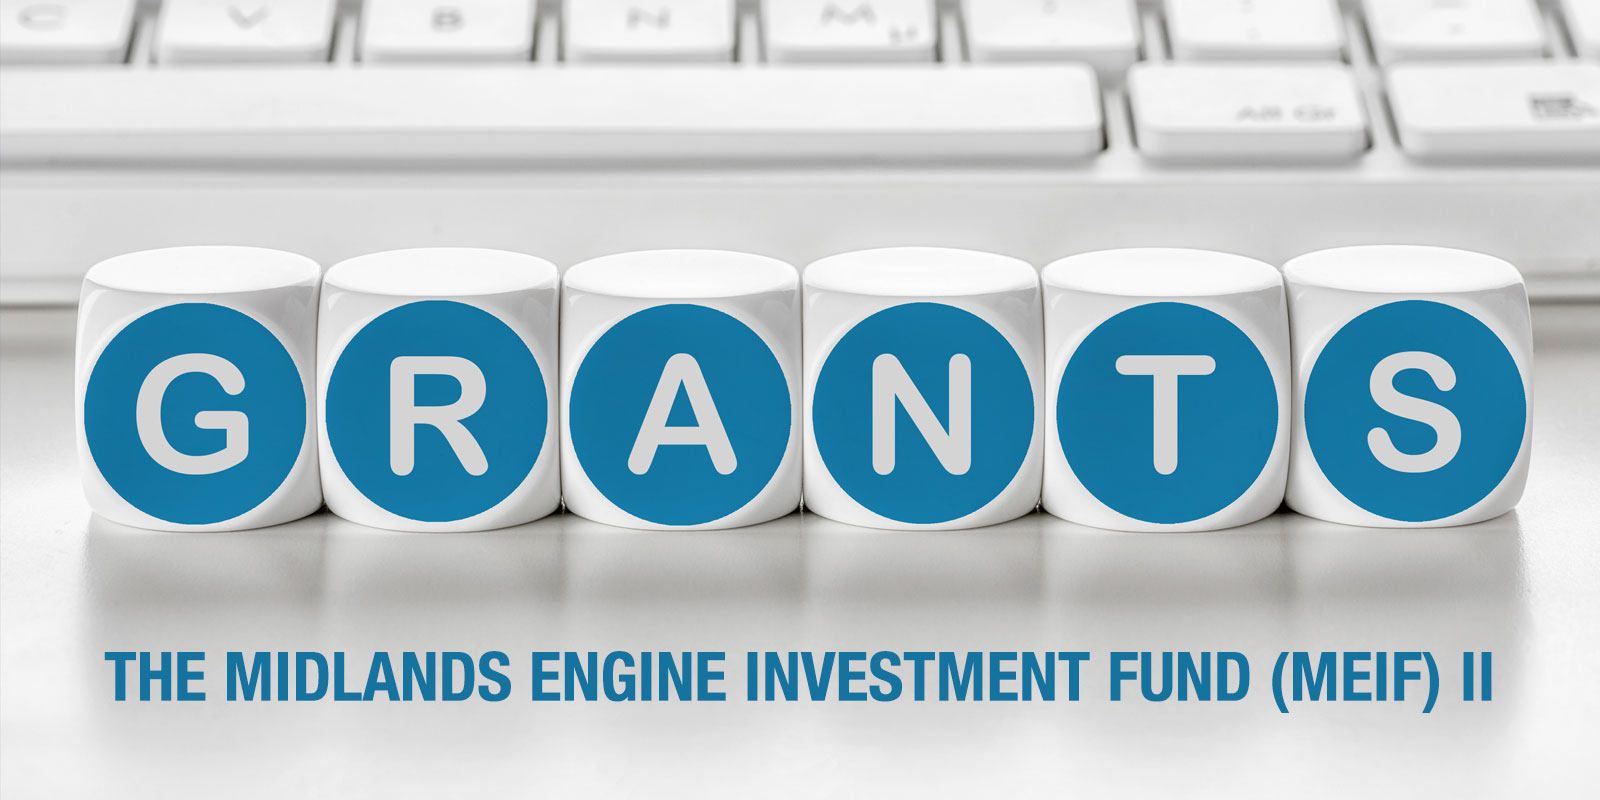 The Midlands Engine Investment Fund (MEIF) II